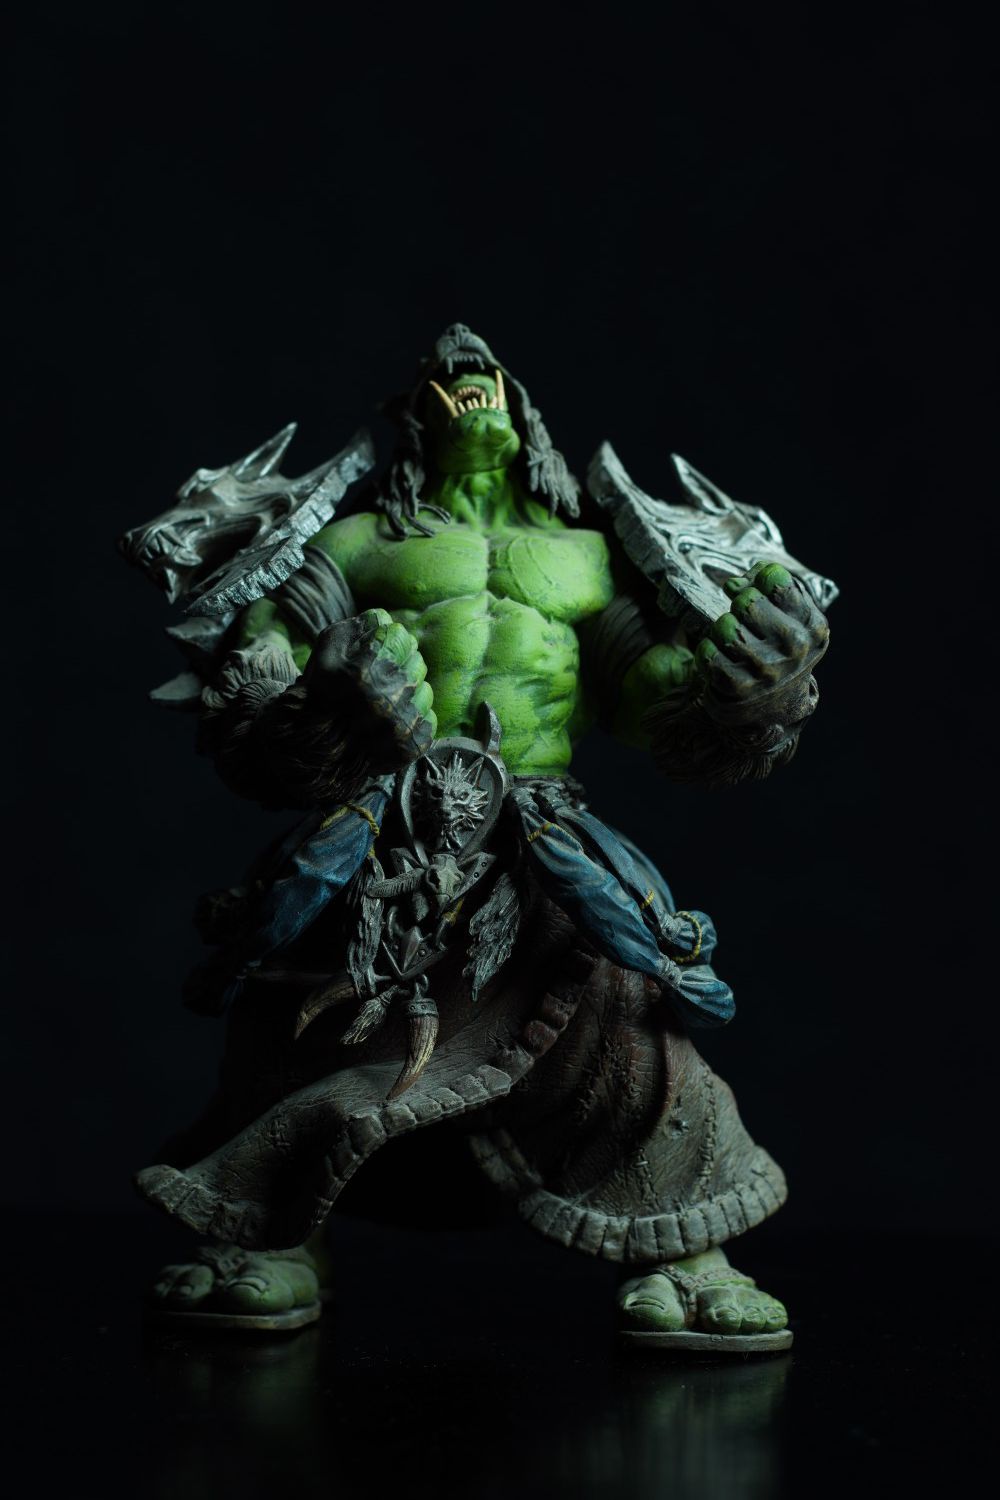 Orc action figure from WOW